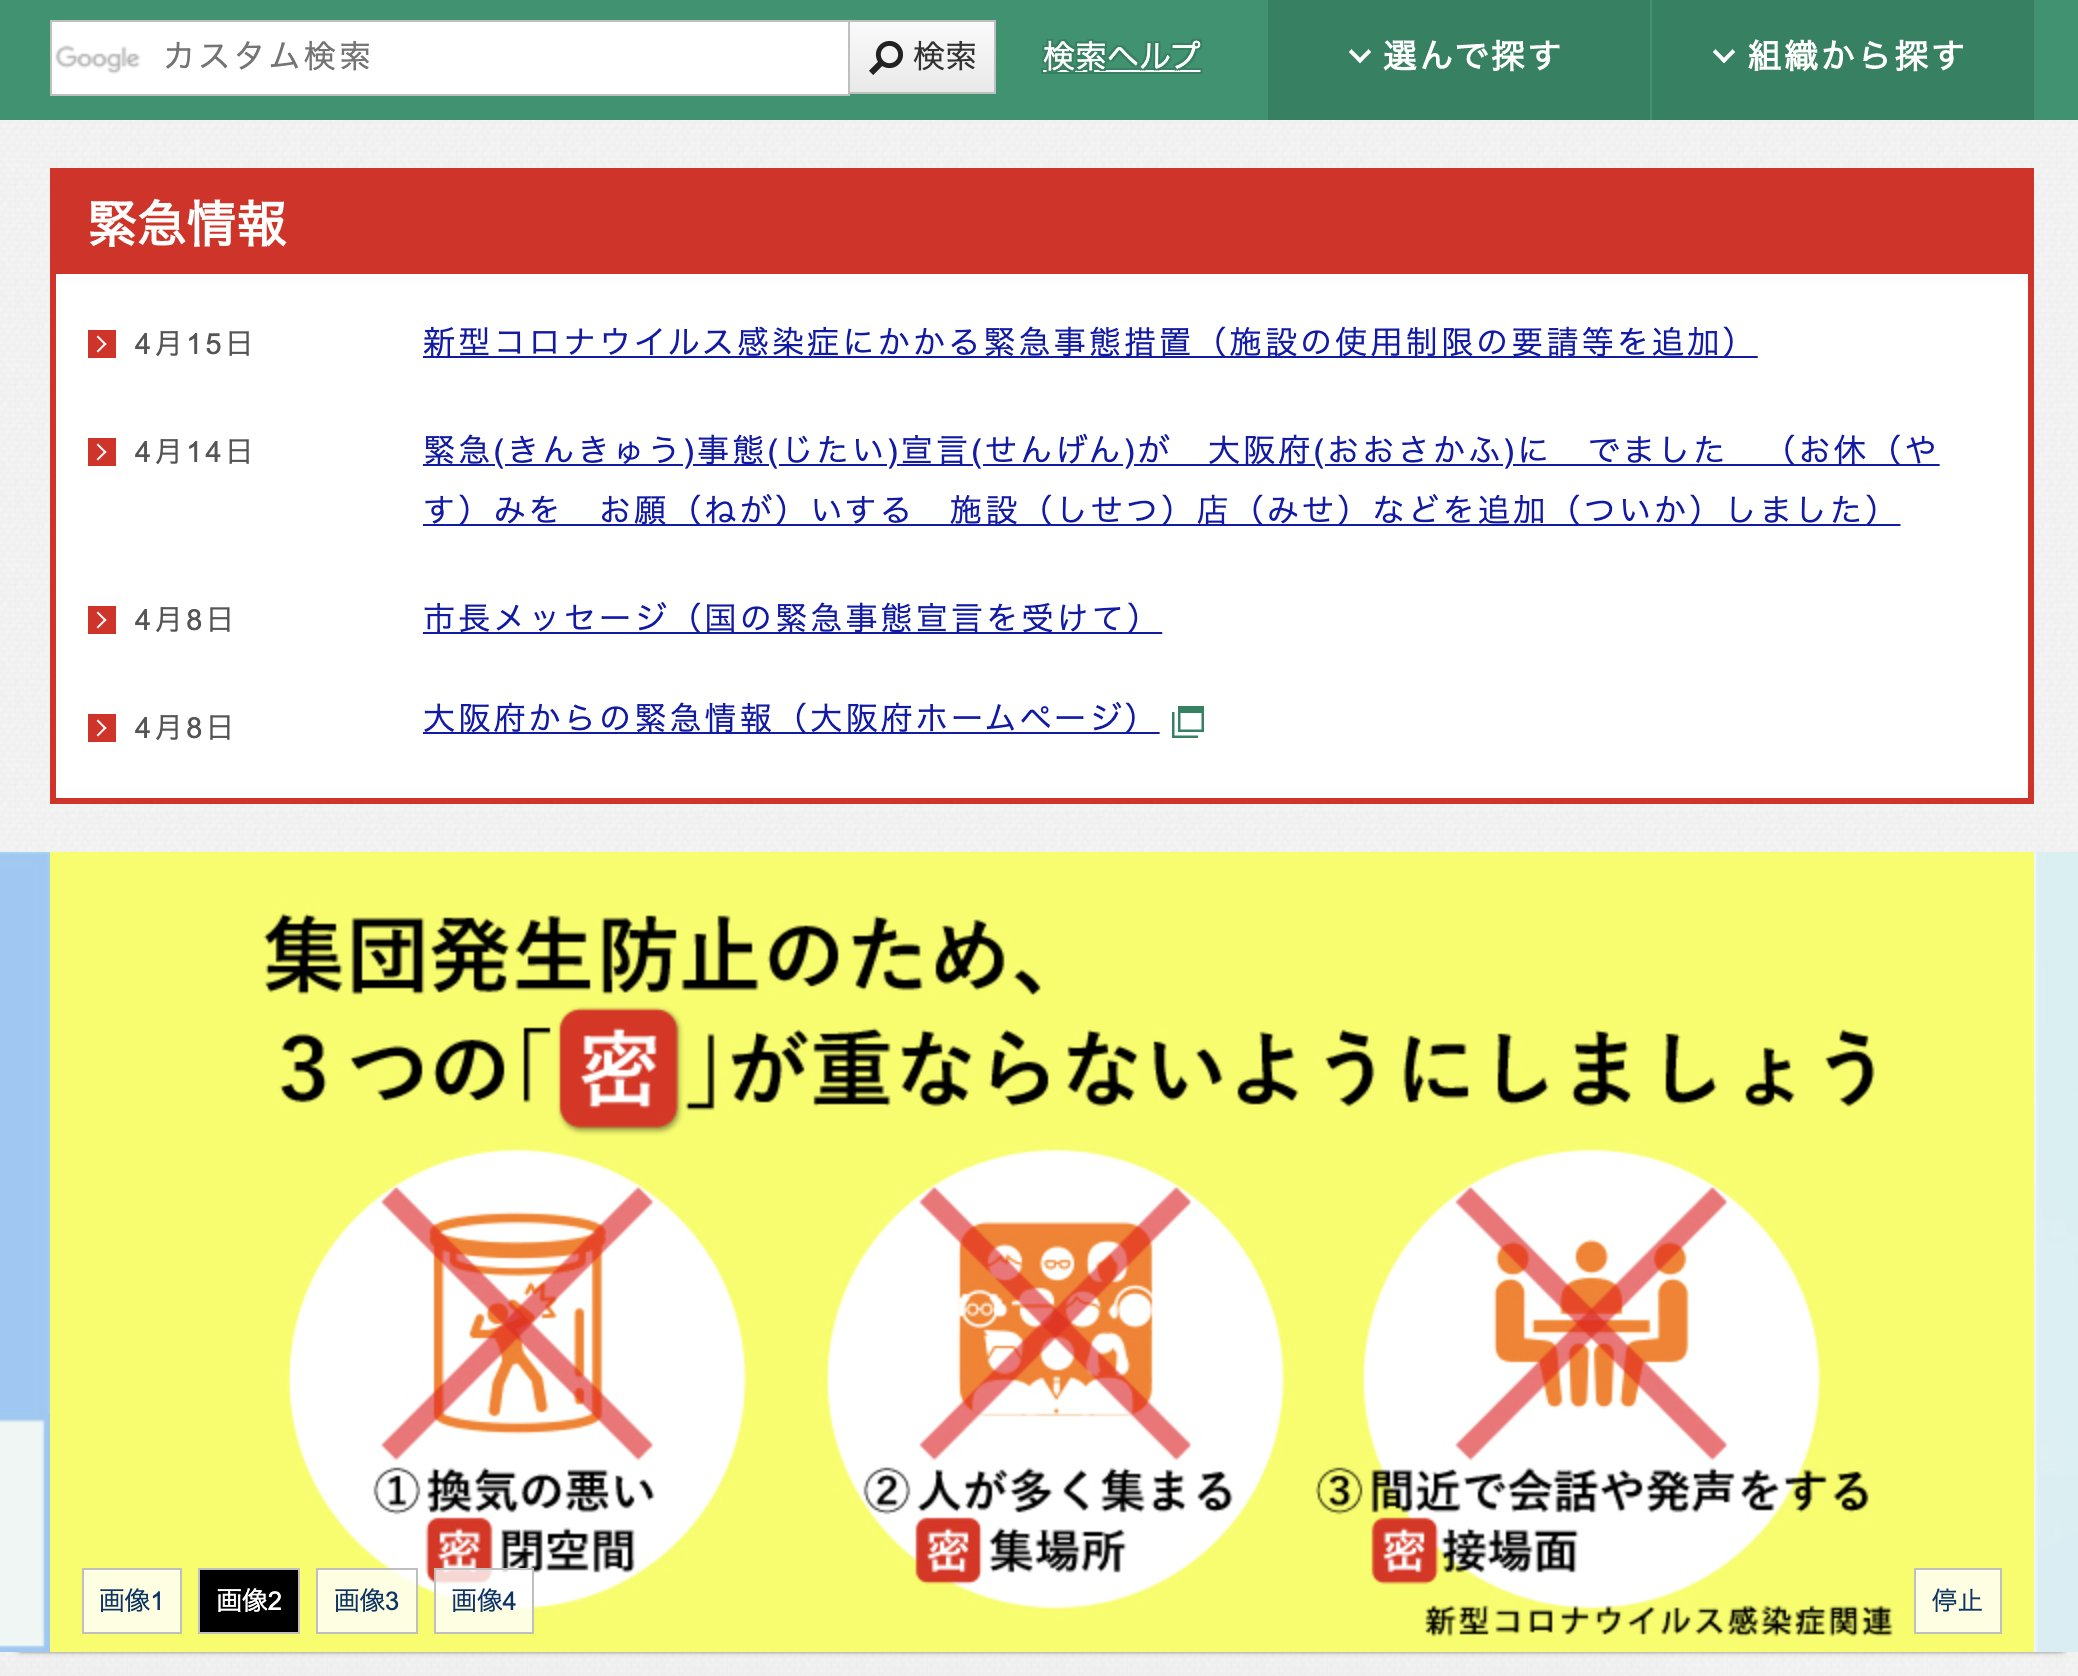 A page set in Japanese. There is a large banner taking up fourty percent of the screenshot, with four large bullet points. Below the banner is an illustration taking up sixty percent of the rest of the page. It uses a set of three pictograms to warn against enclosed spaces with poor ventilation, congregating with others in enclosed areas, and eating with unmasked family.